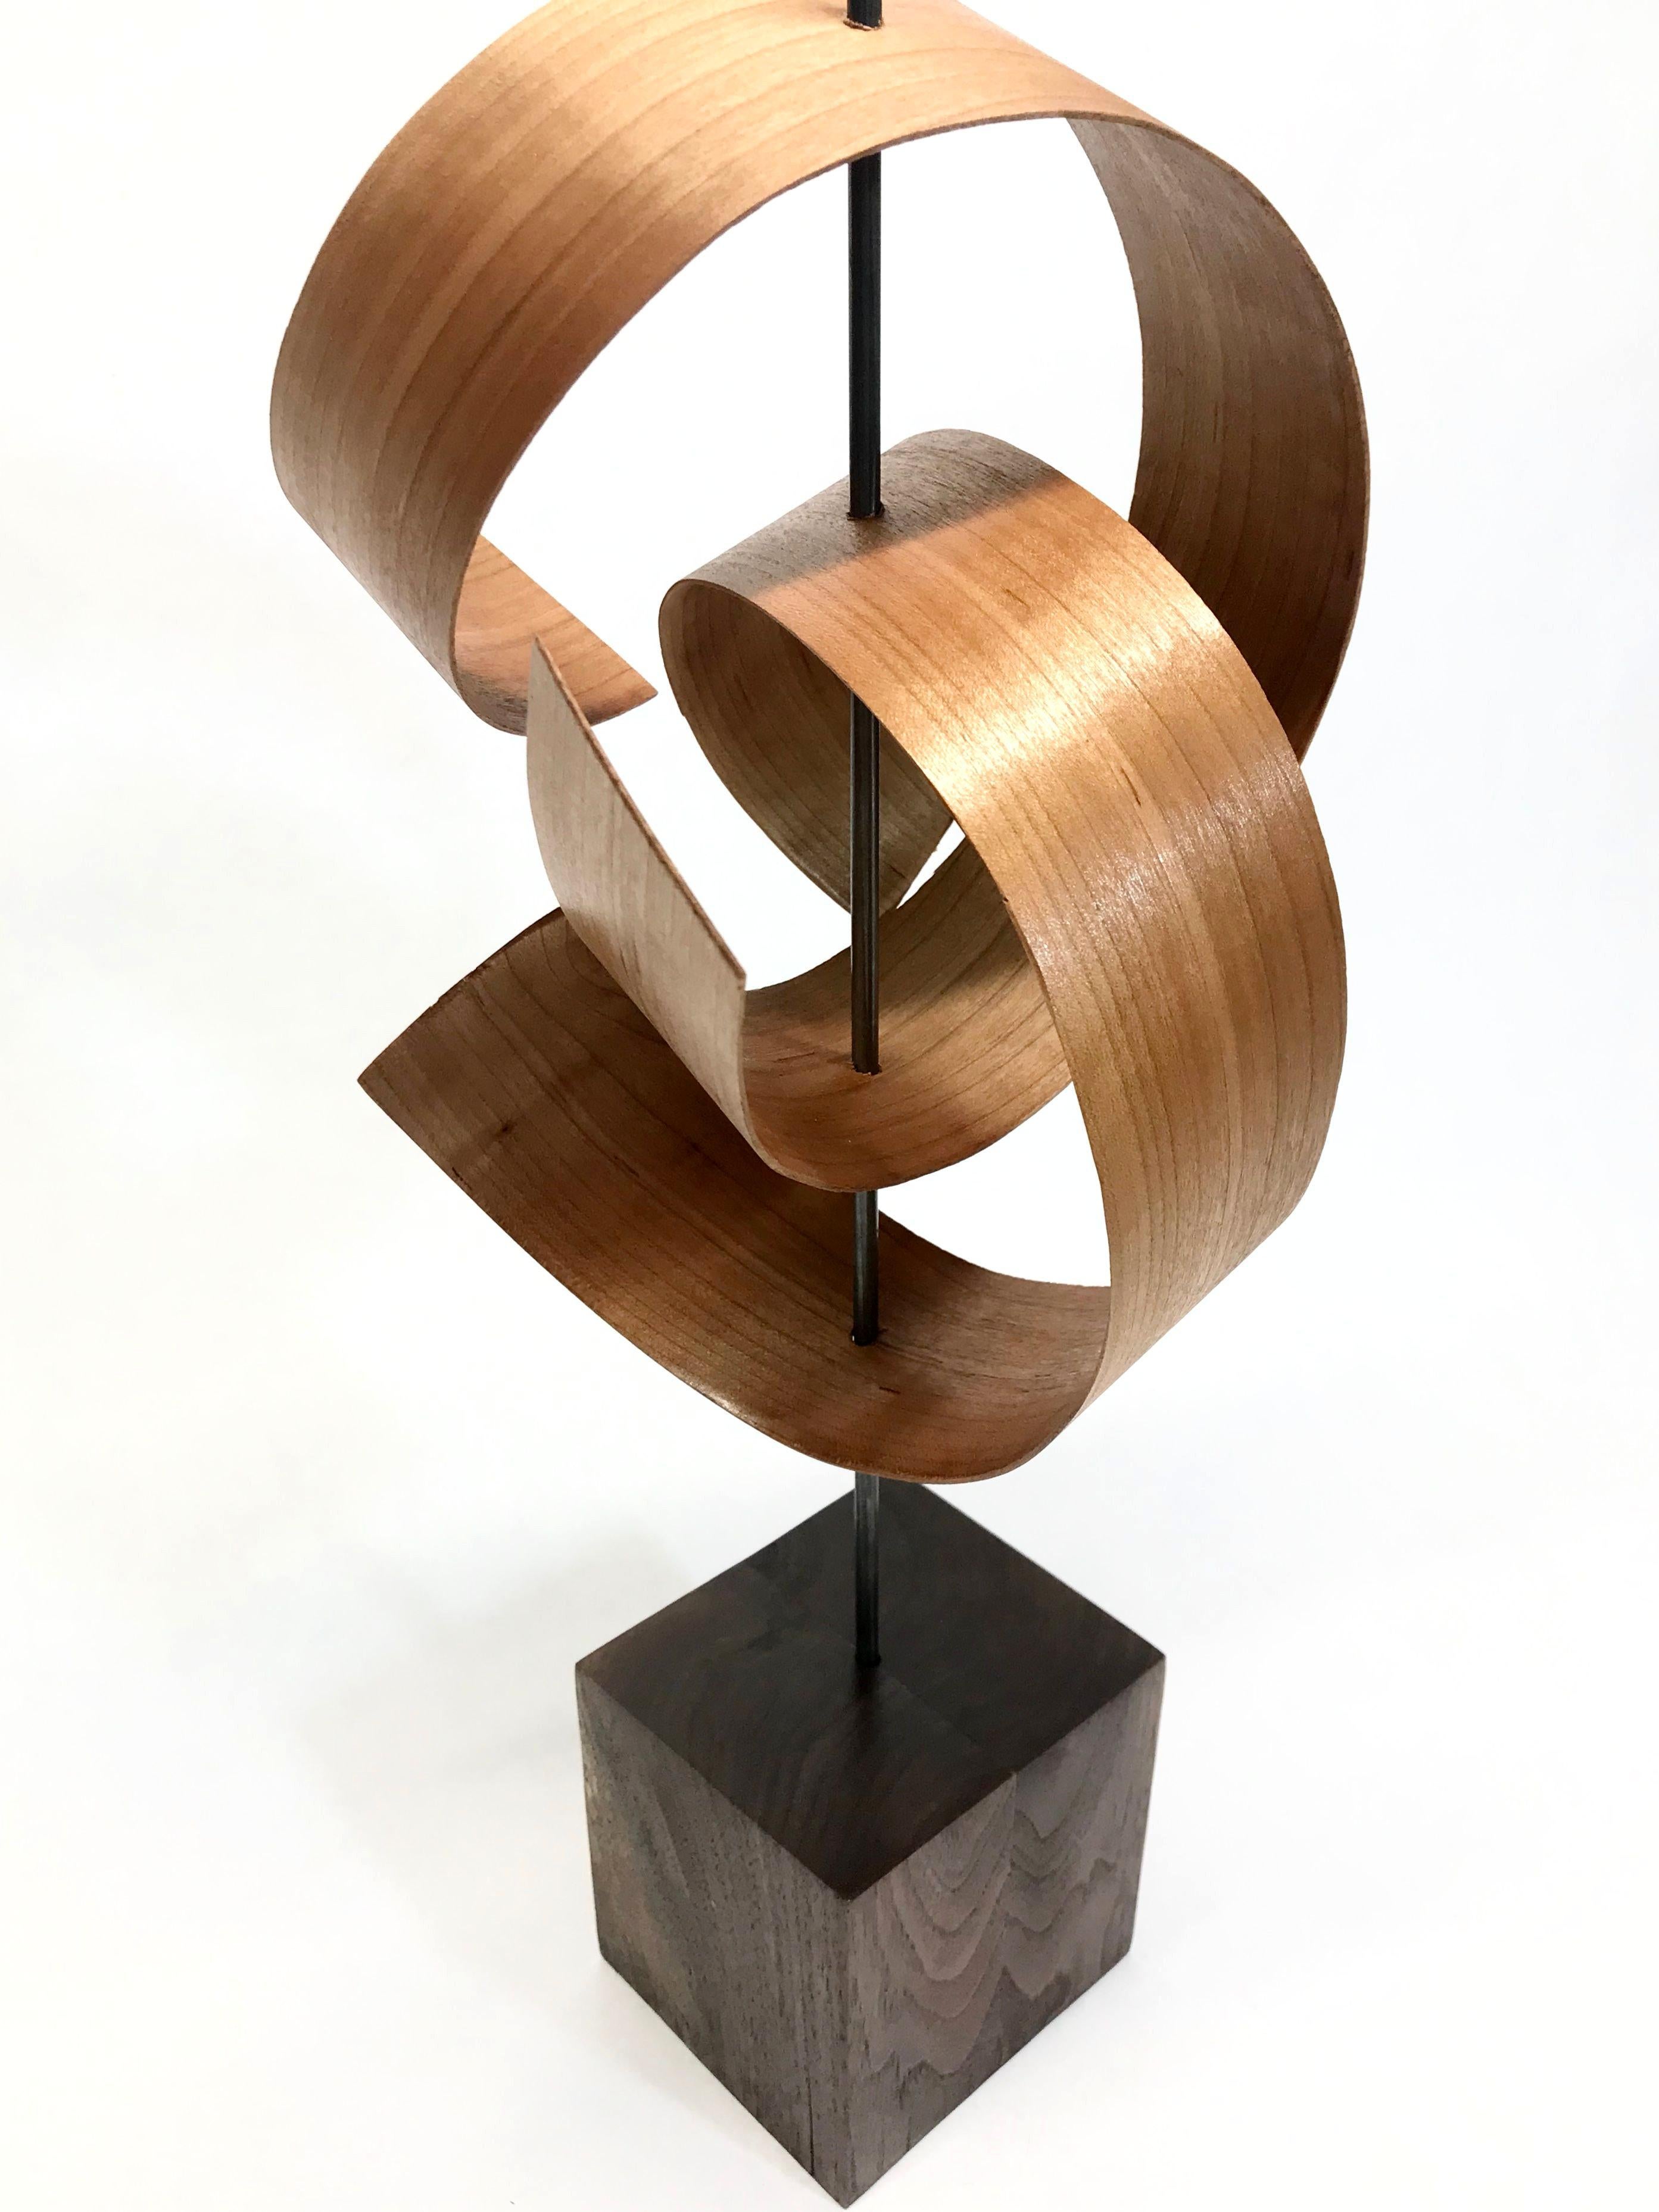 Wood Sculpture by Jeff L., Mid-Century Modern Inspired, Contemporary Abstract 1